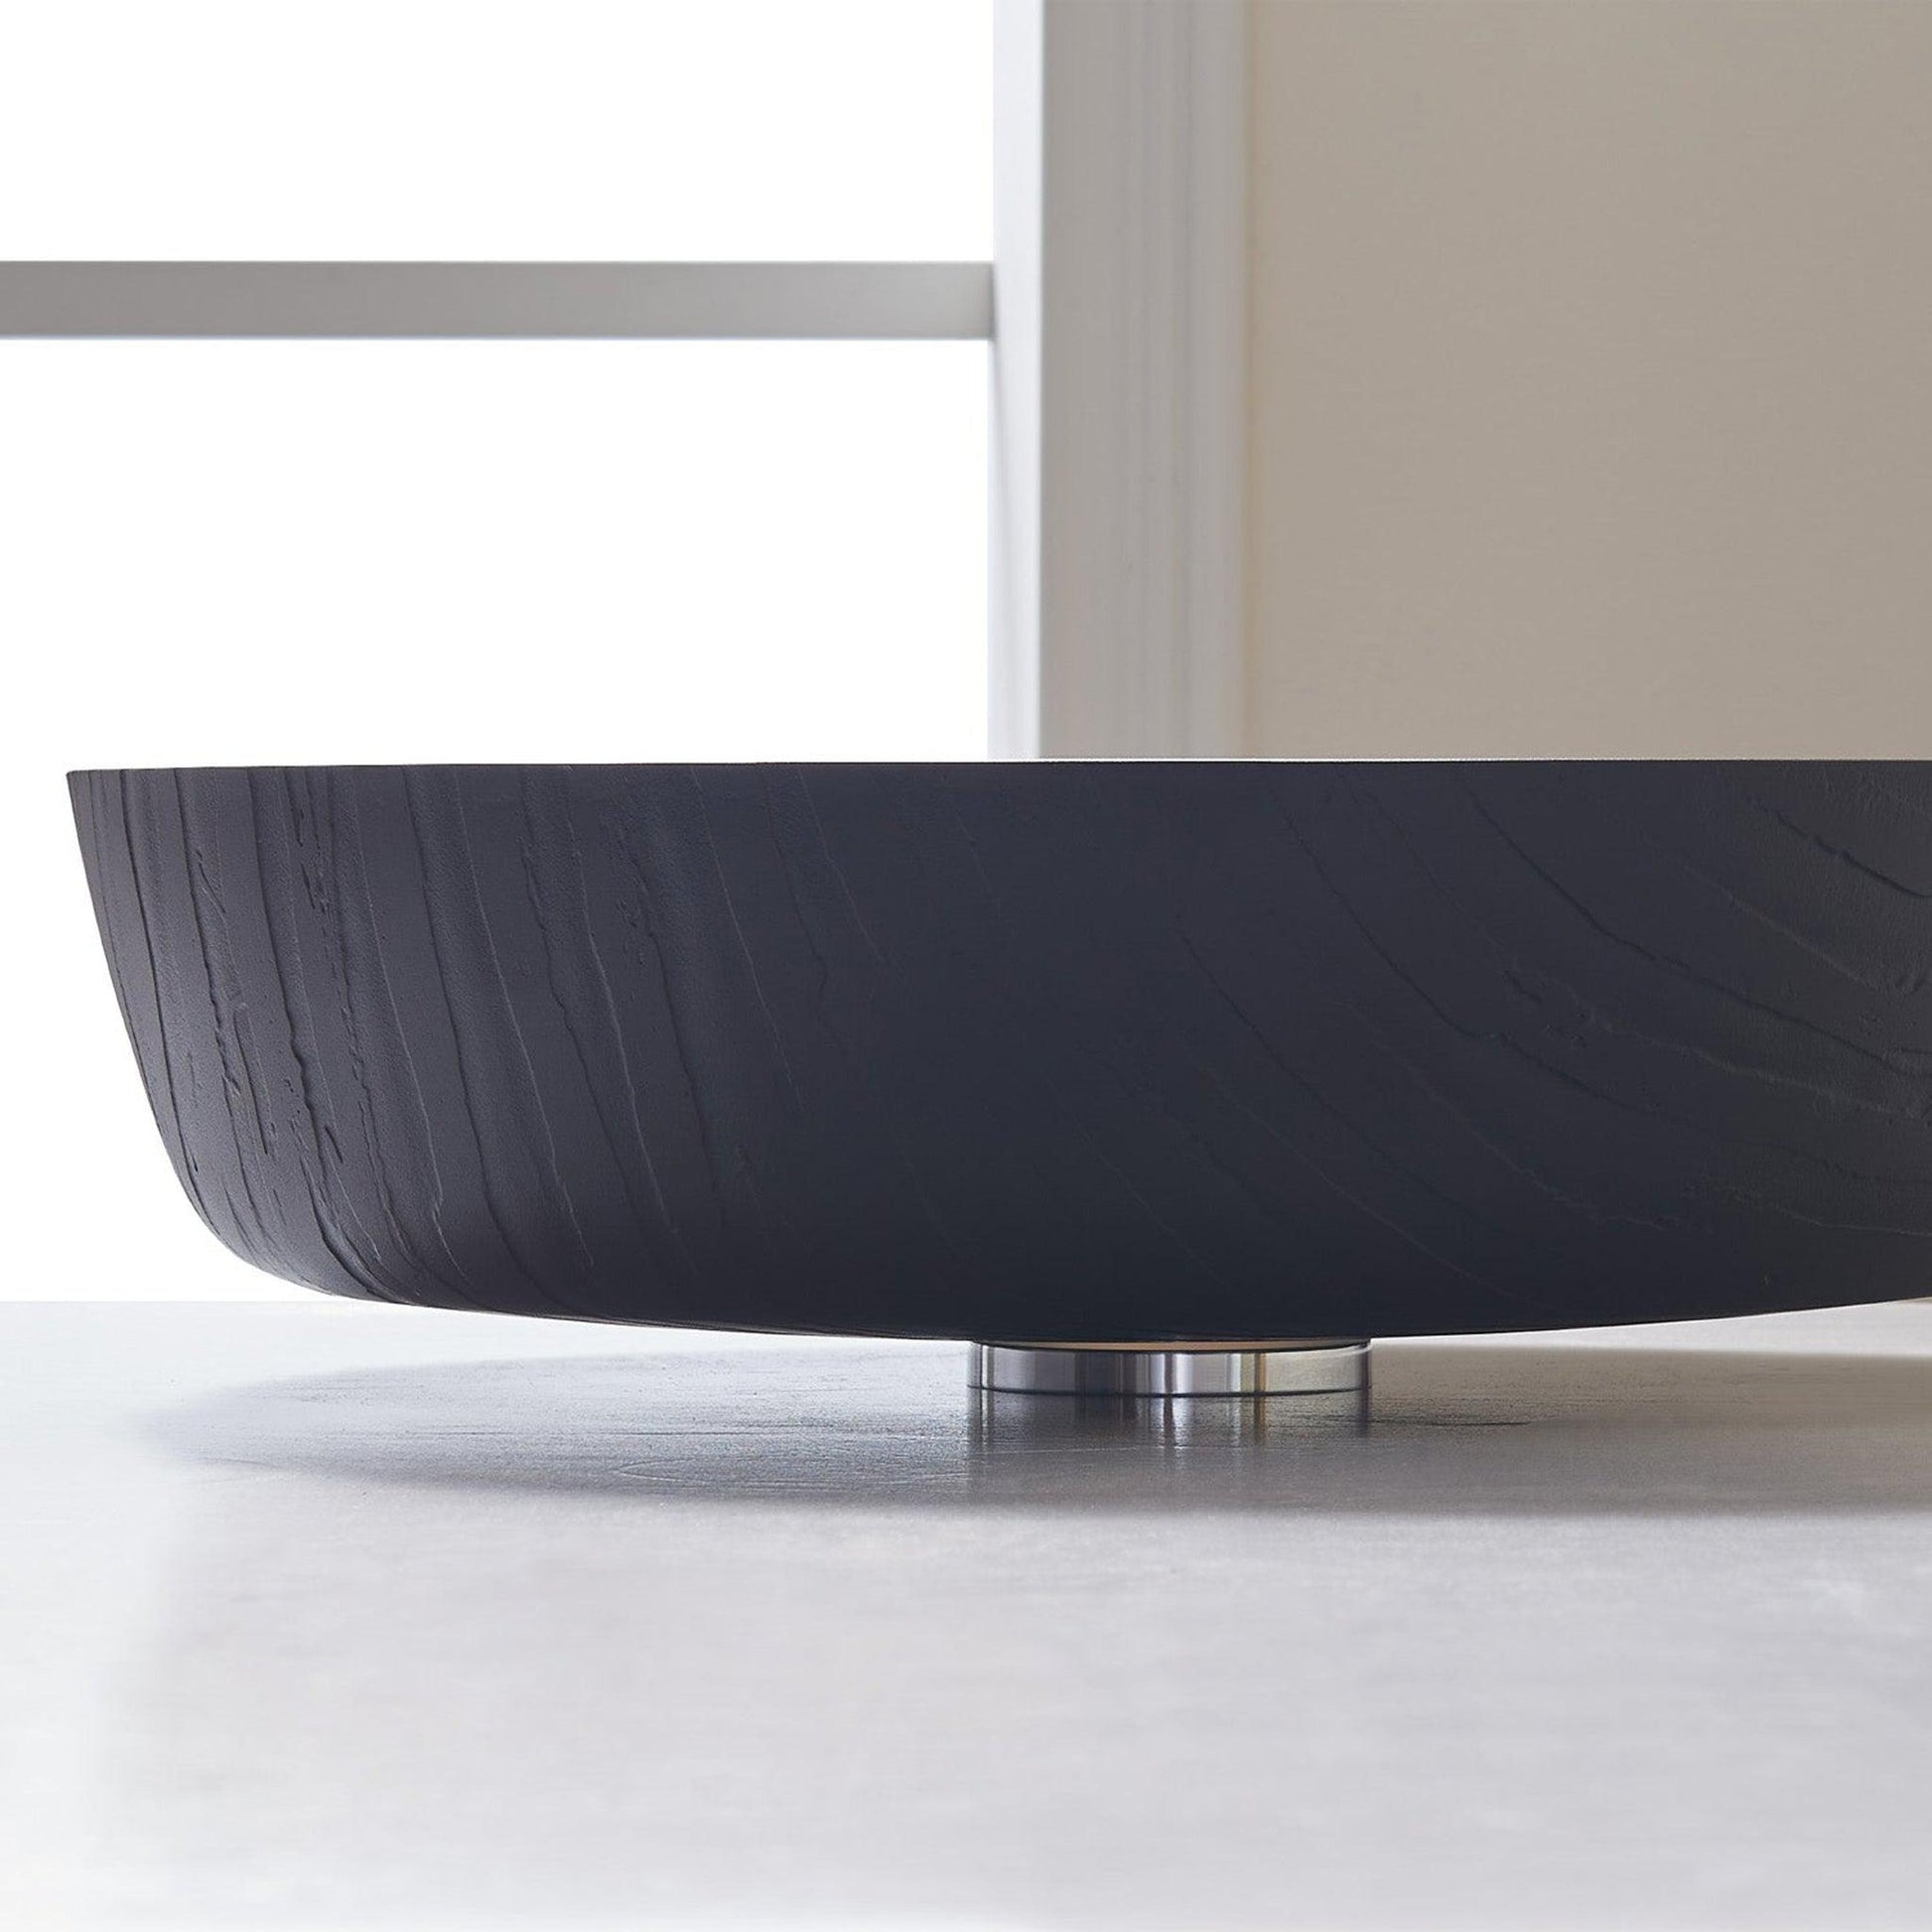 Vinnova Ferrol 17" Matte Black Circular Tempered Glass Painted by Hand Vessel Bathroom Sink Without Faucet